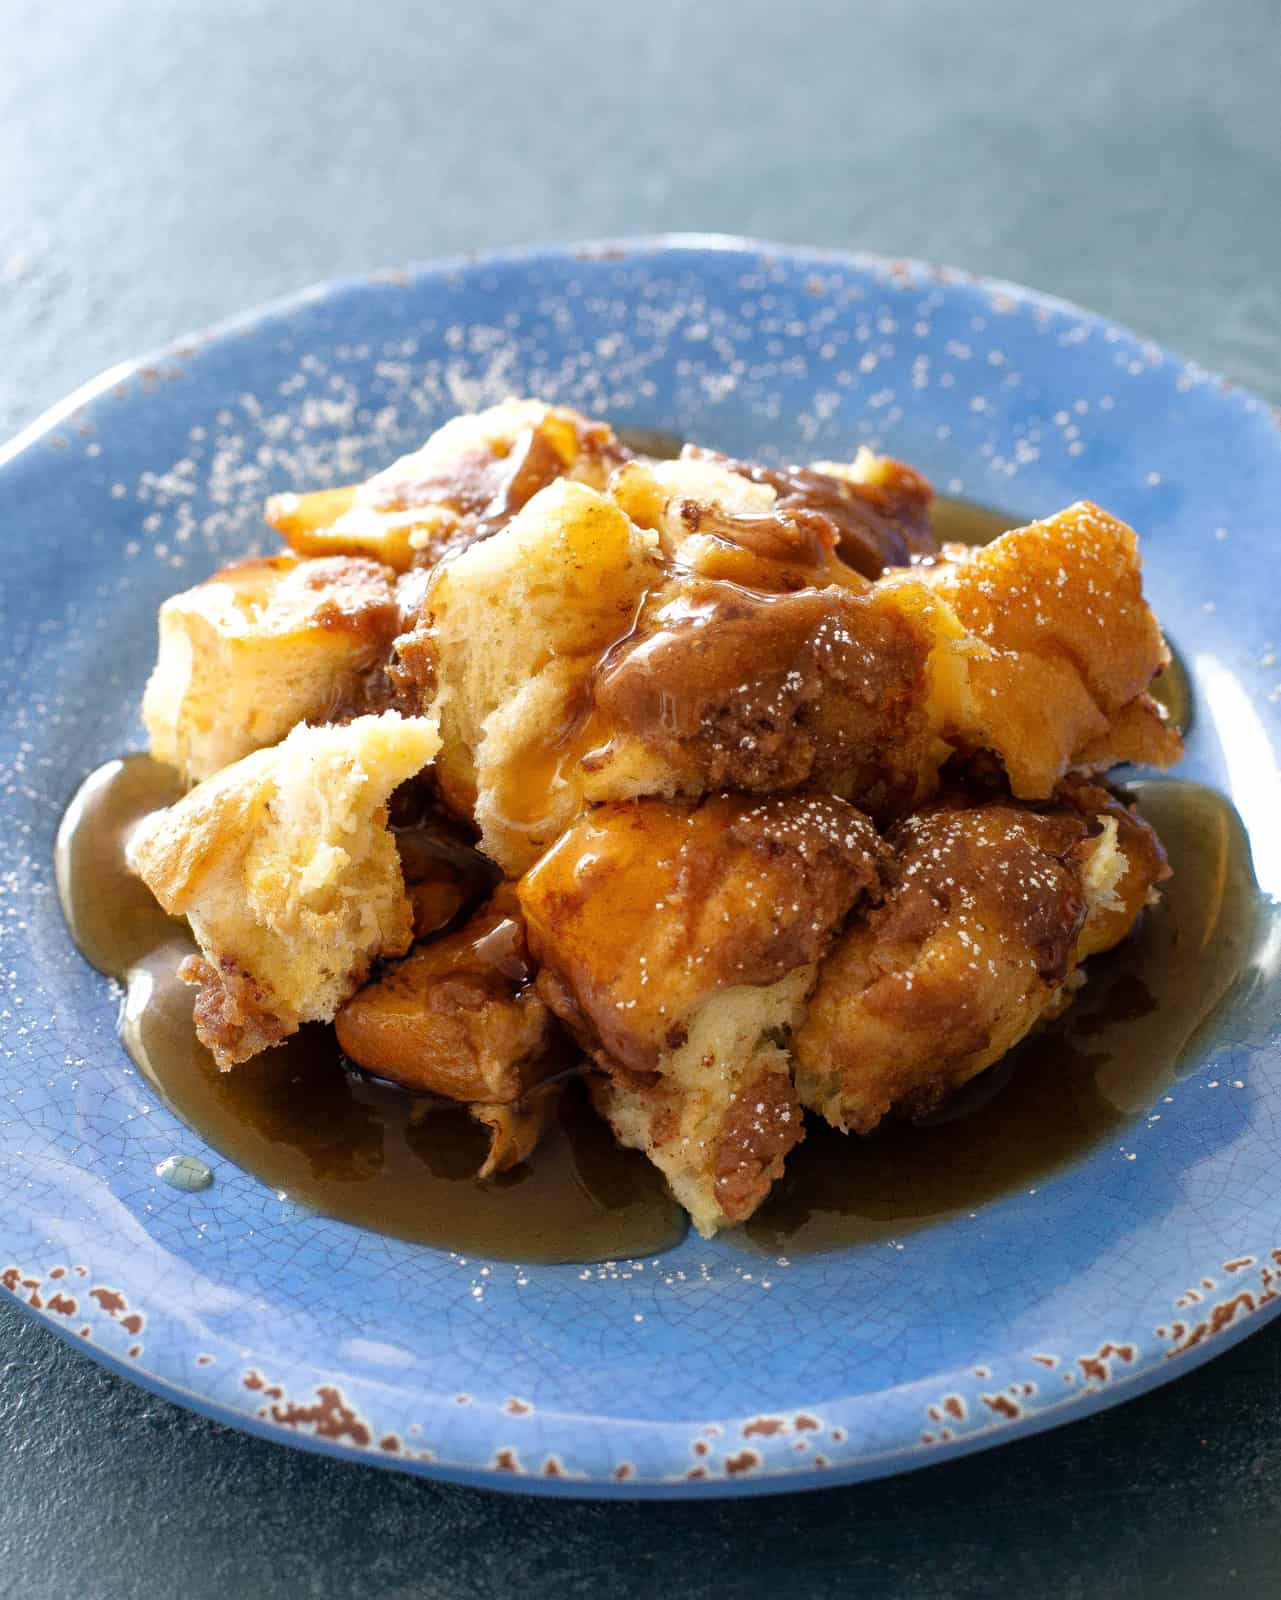 https://www.the-girl-who-ate-everything.com/wp-content/uploads/2022/10/crockpot-french-toast-recipe-001.jpg